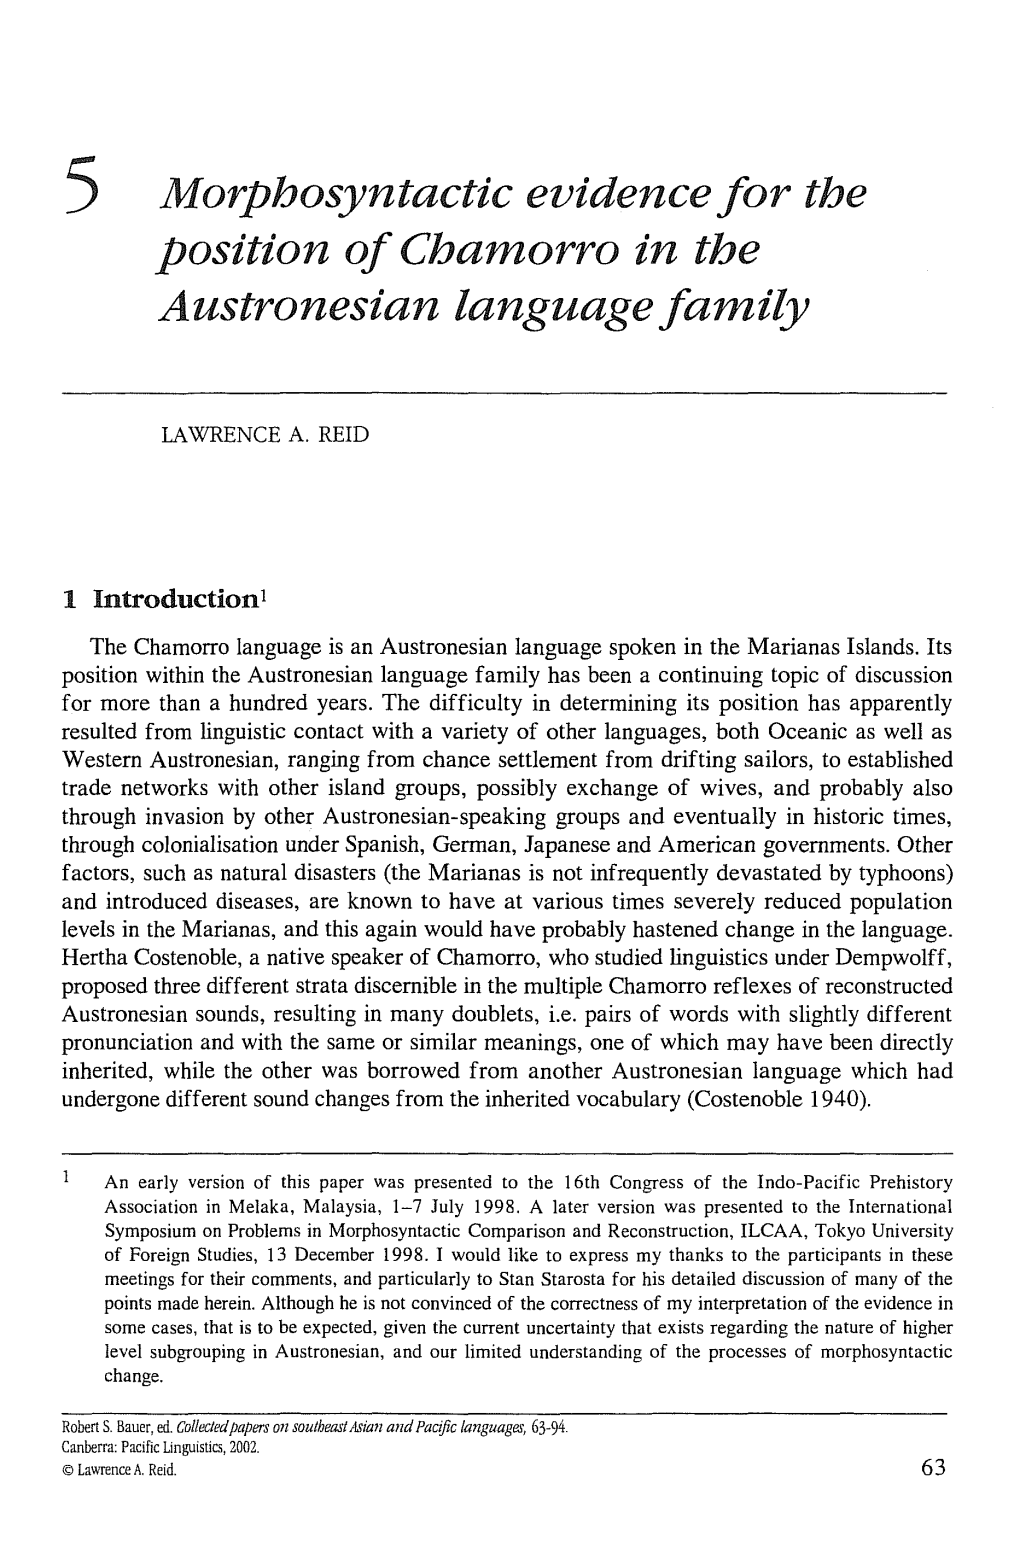 5 Morphosyntactic Evidencefor the Position Ofchamorro in the Austronesian Languagefamily